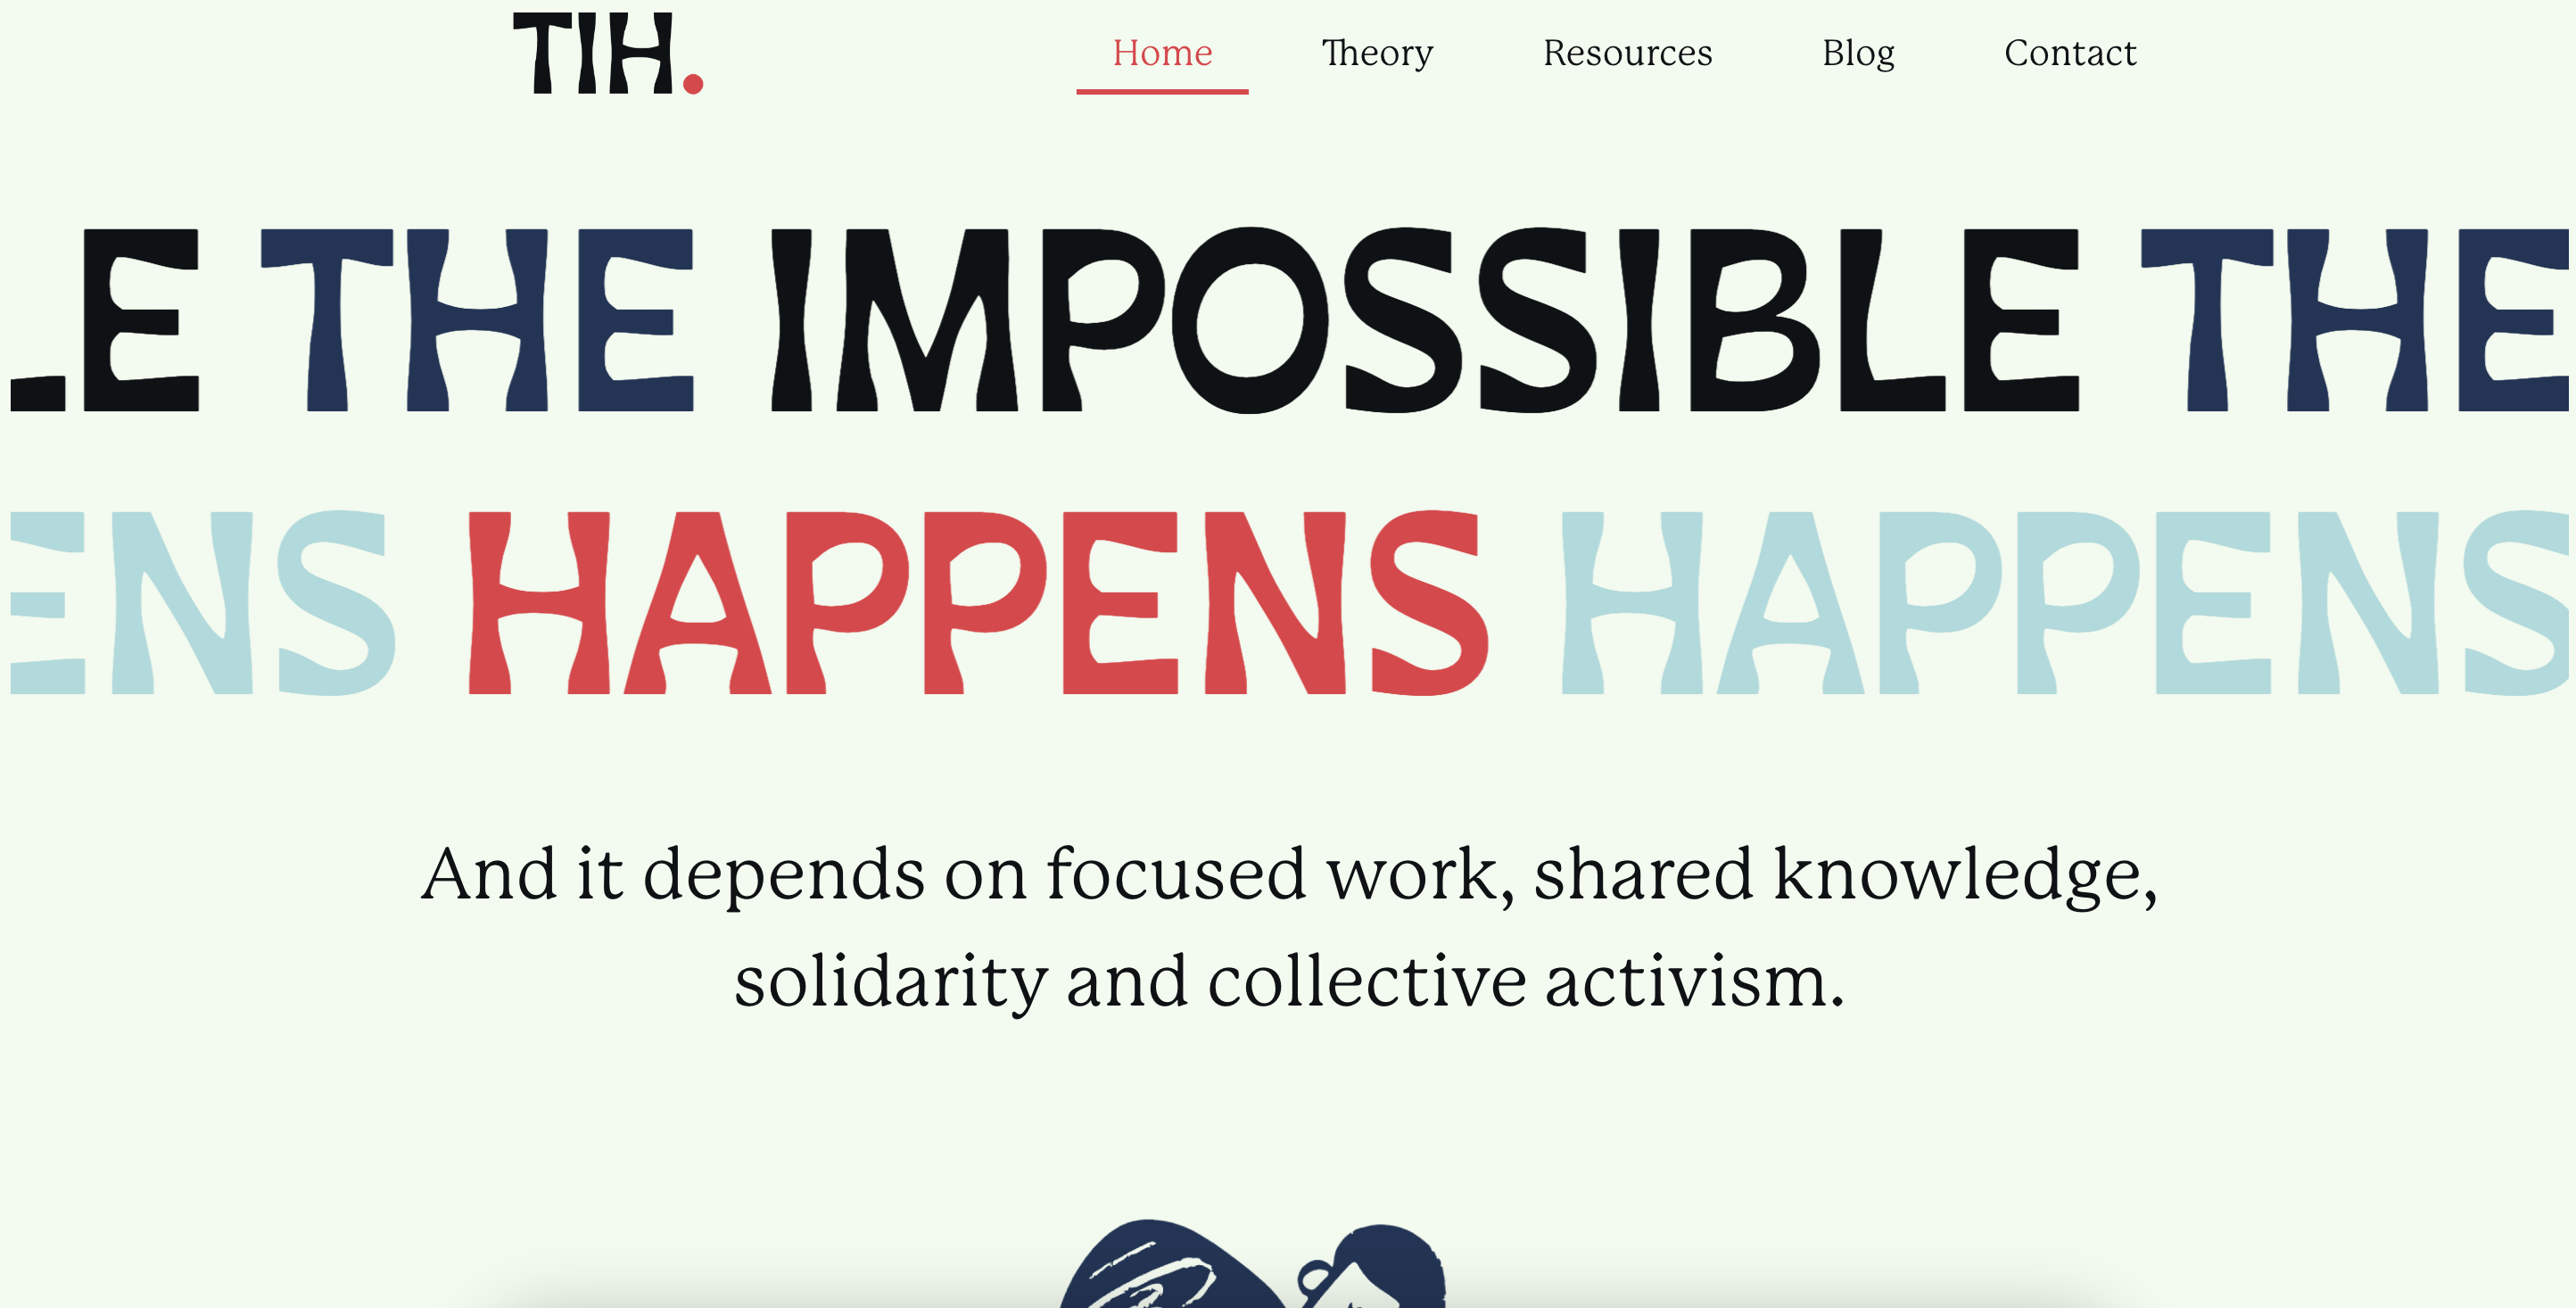 In this screenshot image, text across the website header reads 'The Impossible Happens', repeated on a marquee. Underneath this says 'And it depends on focused work, shared knowledge, solidarity and collective activism'.